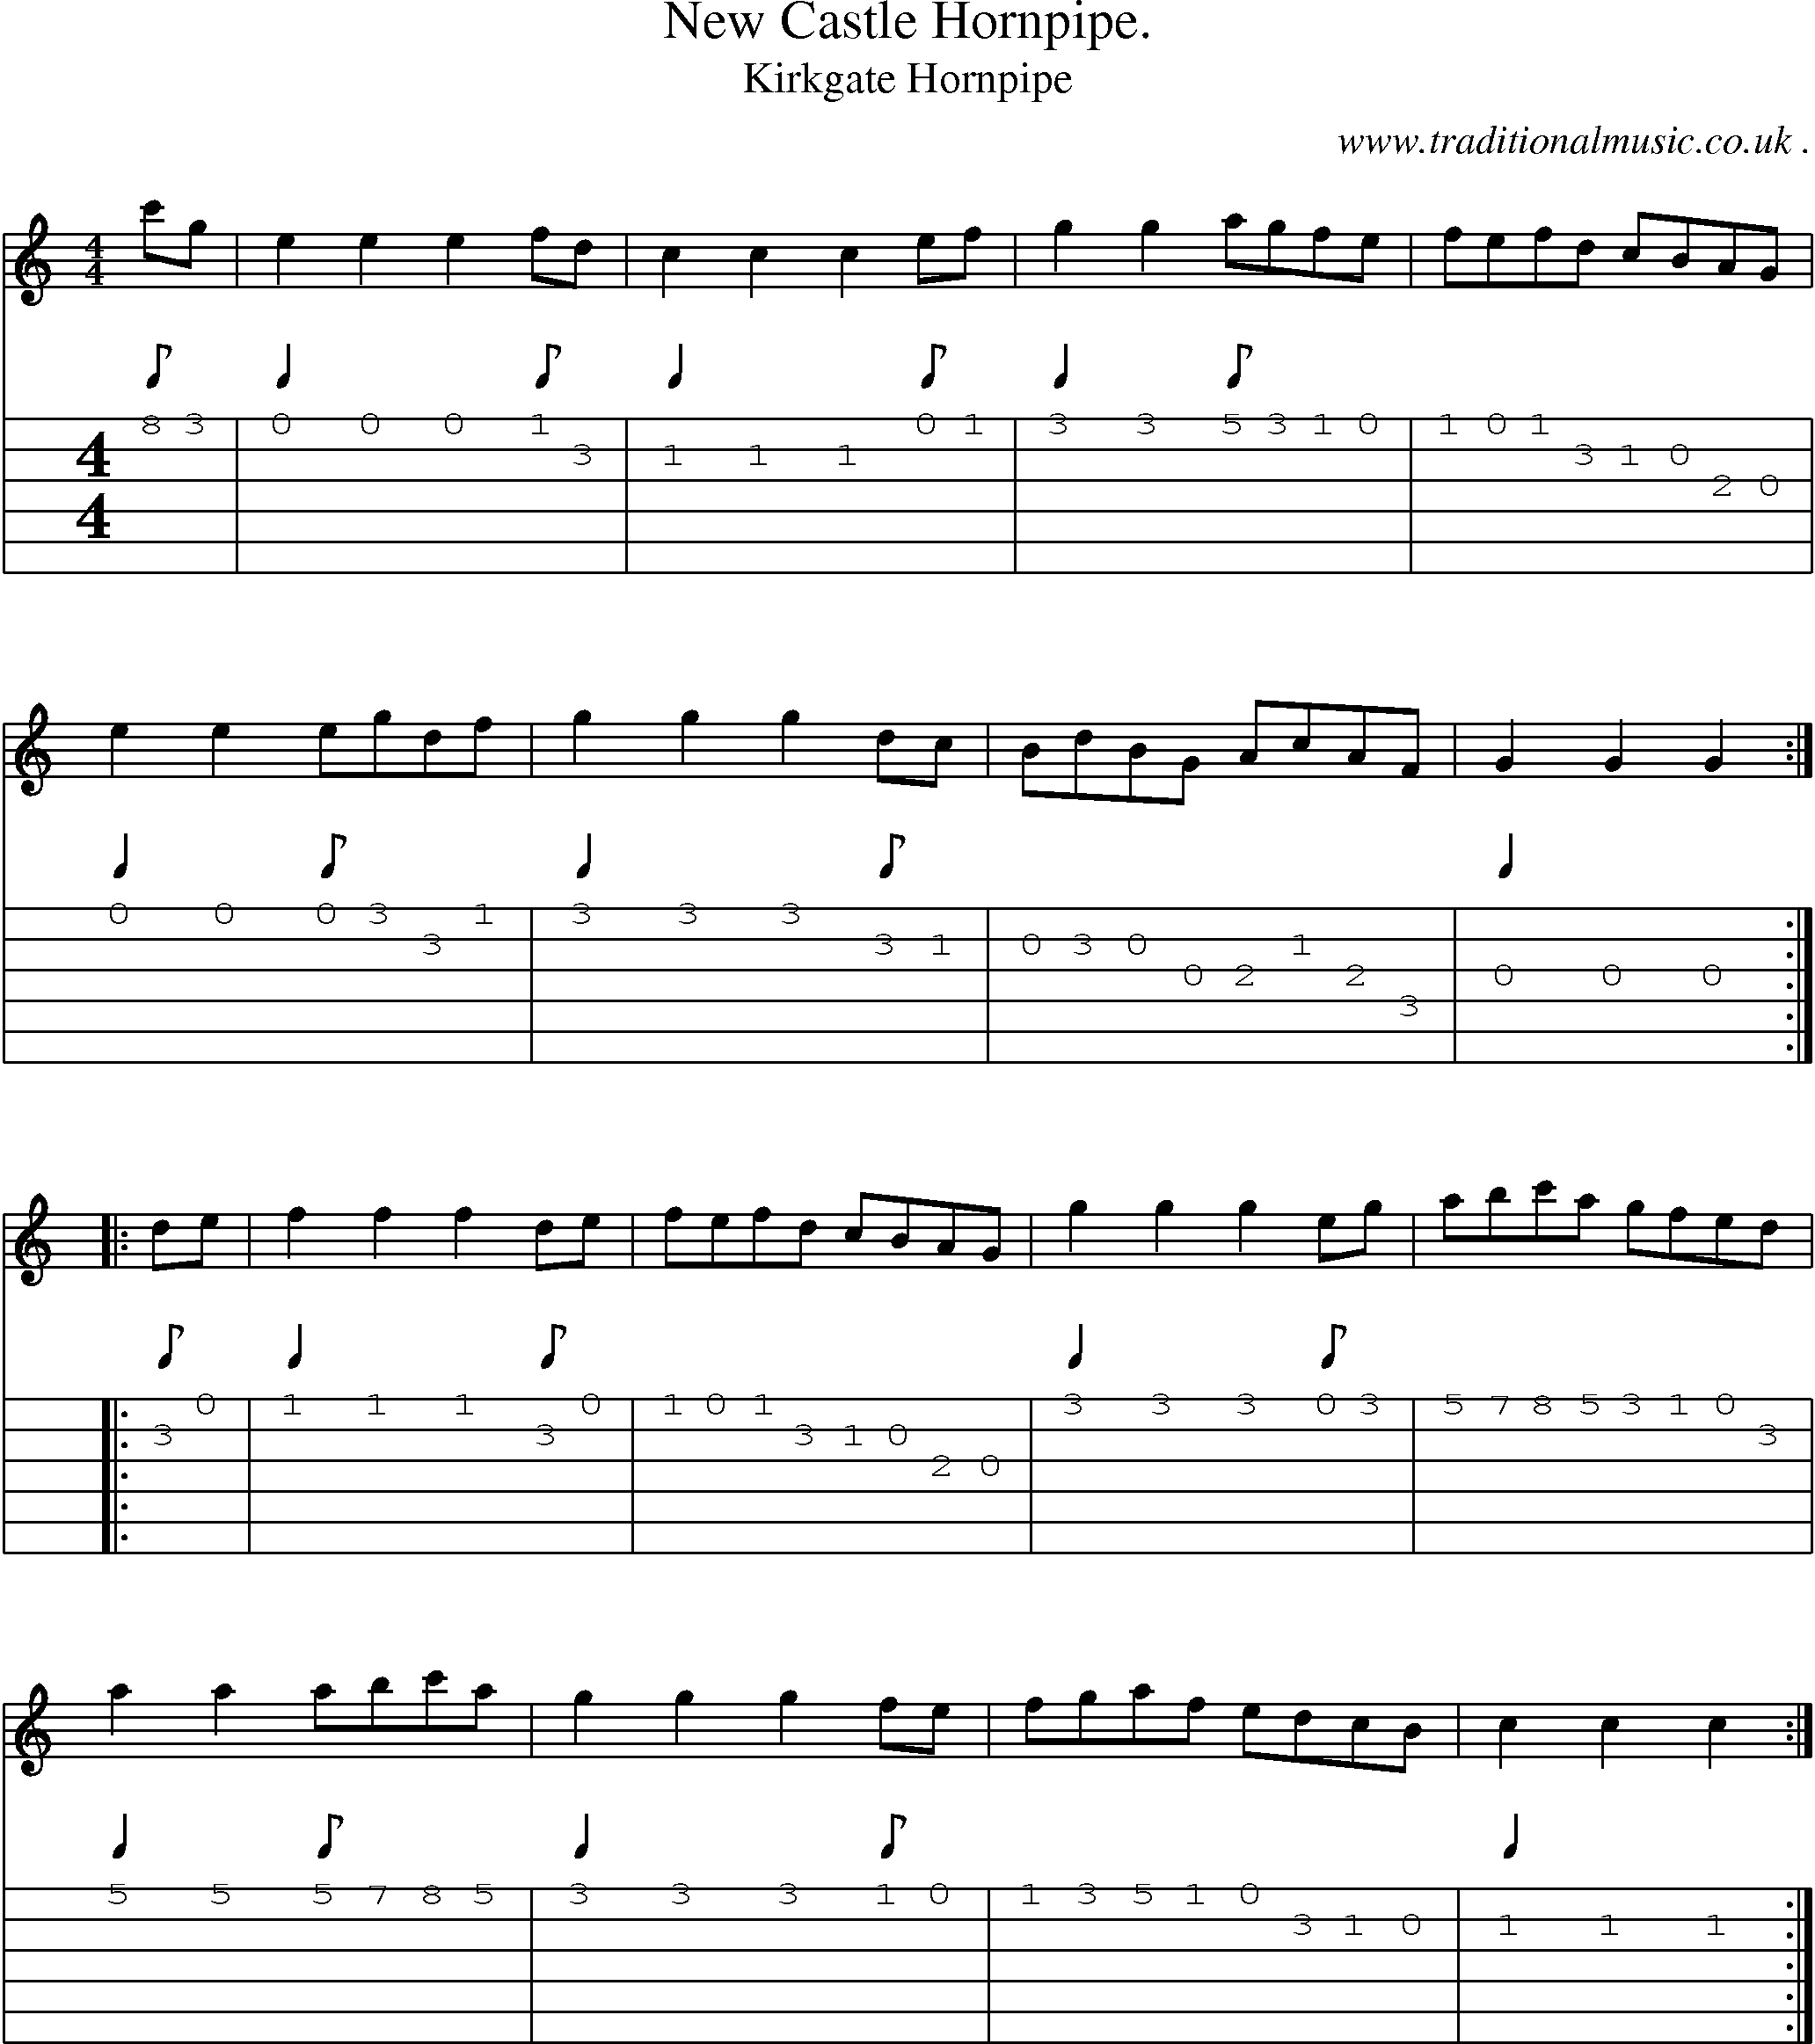 Sheet-Music and Guitar Tabs for New Castle Hornpipe